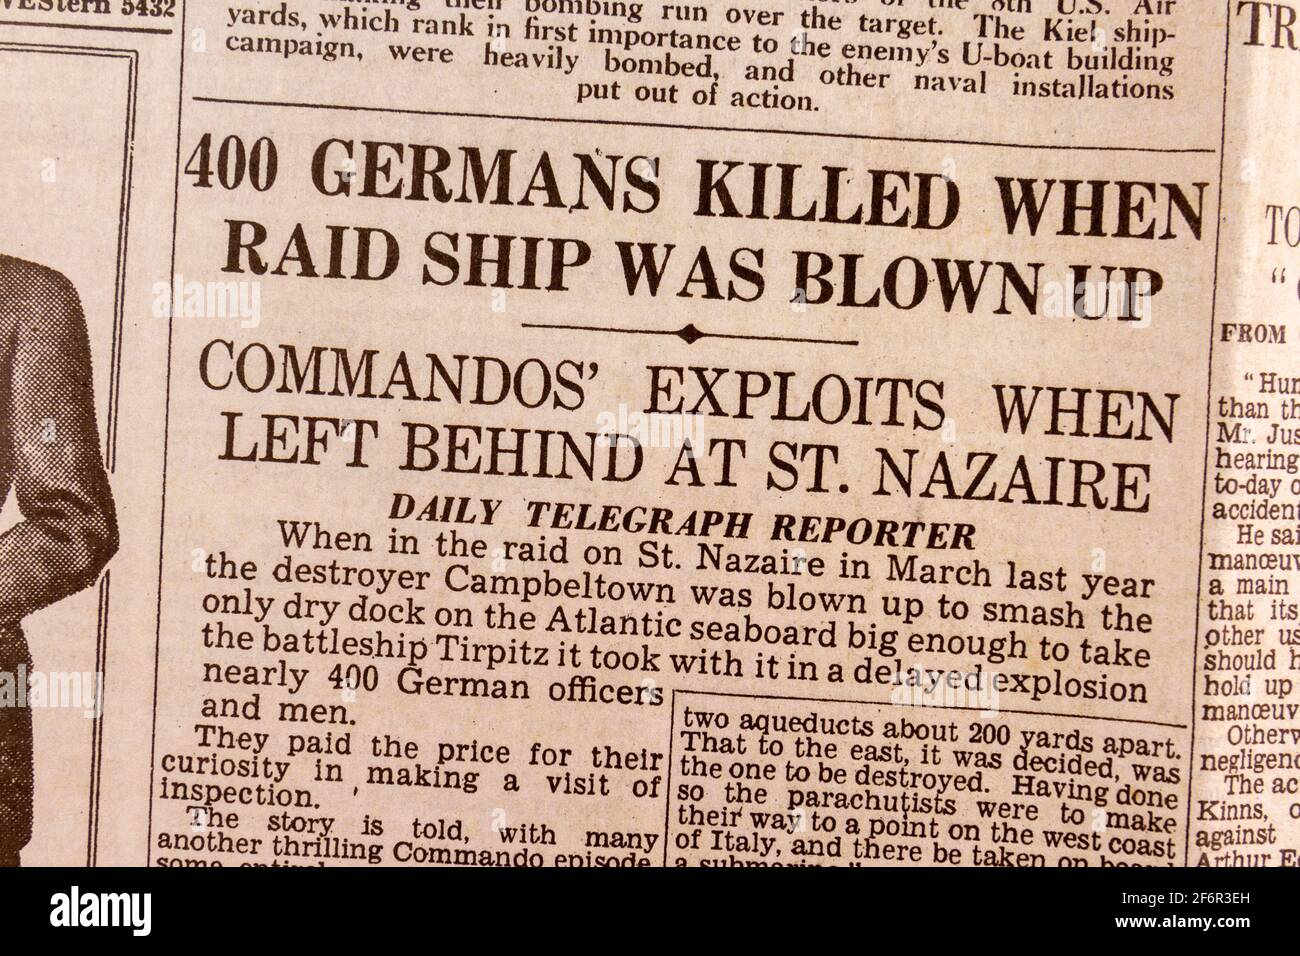 '400 Germans Killed When Raid Ship was blown up' story in the Daily Telegraph (replica), 18th May 1943, the day after the Dam Busters raid. Stock Photo